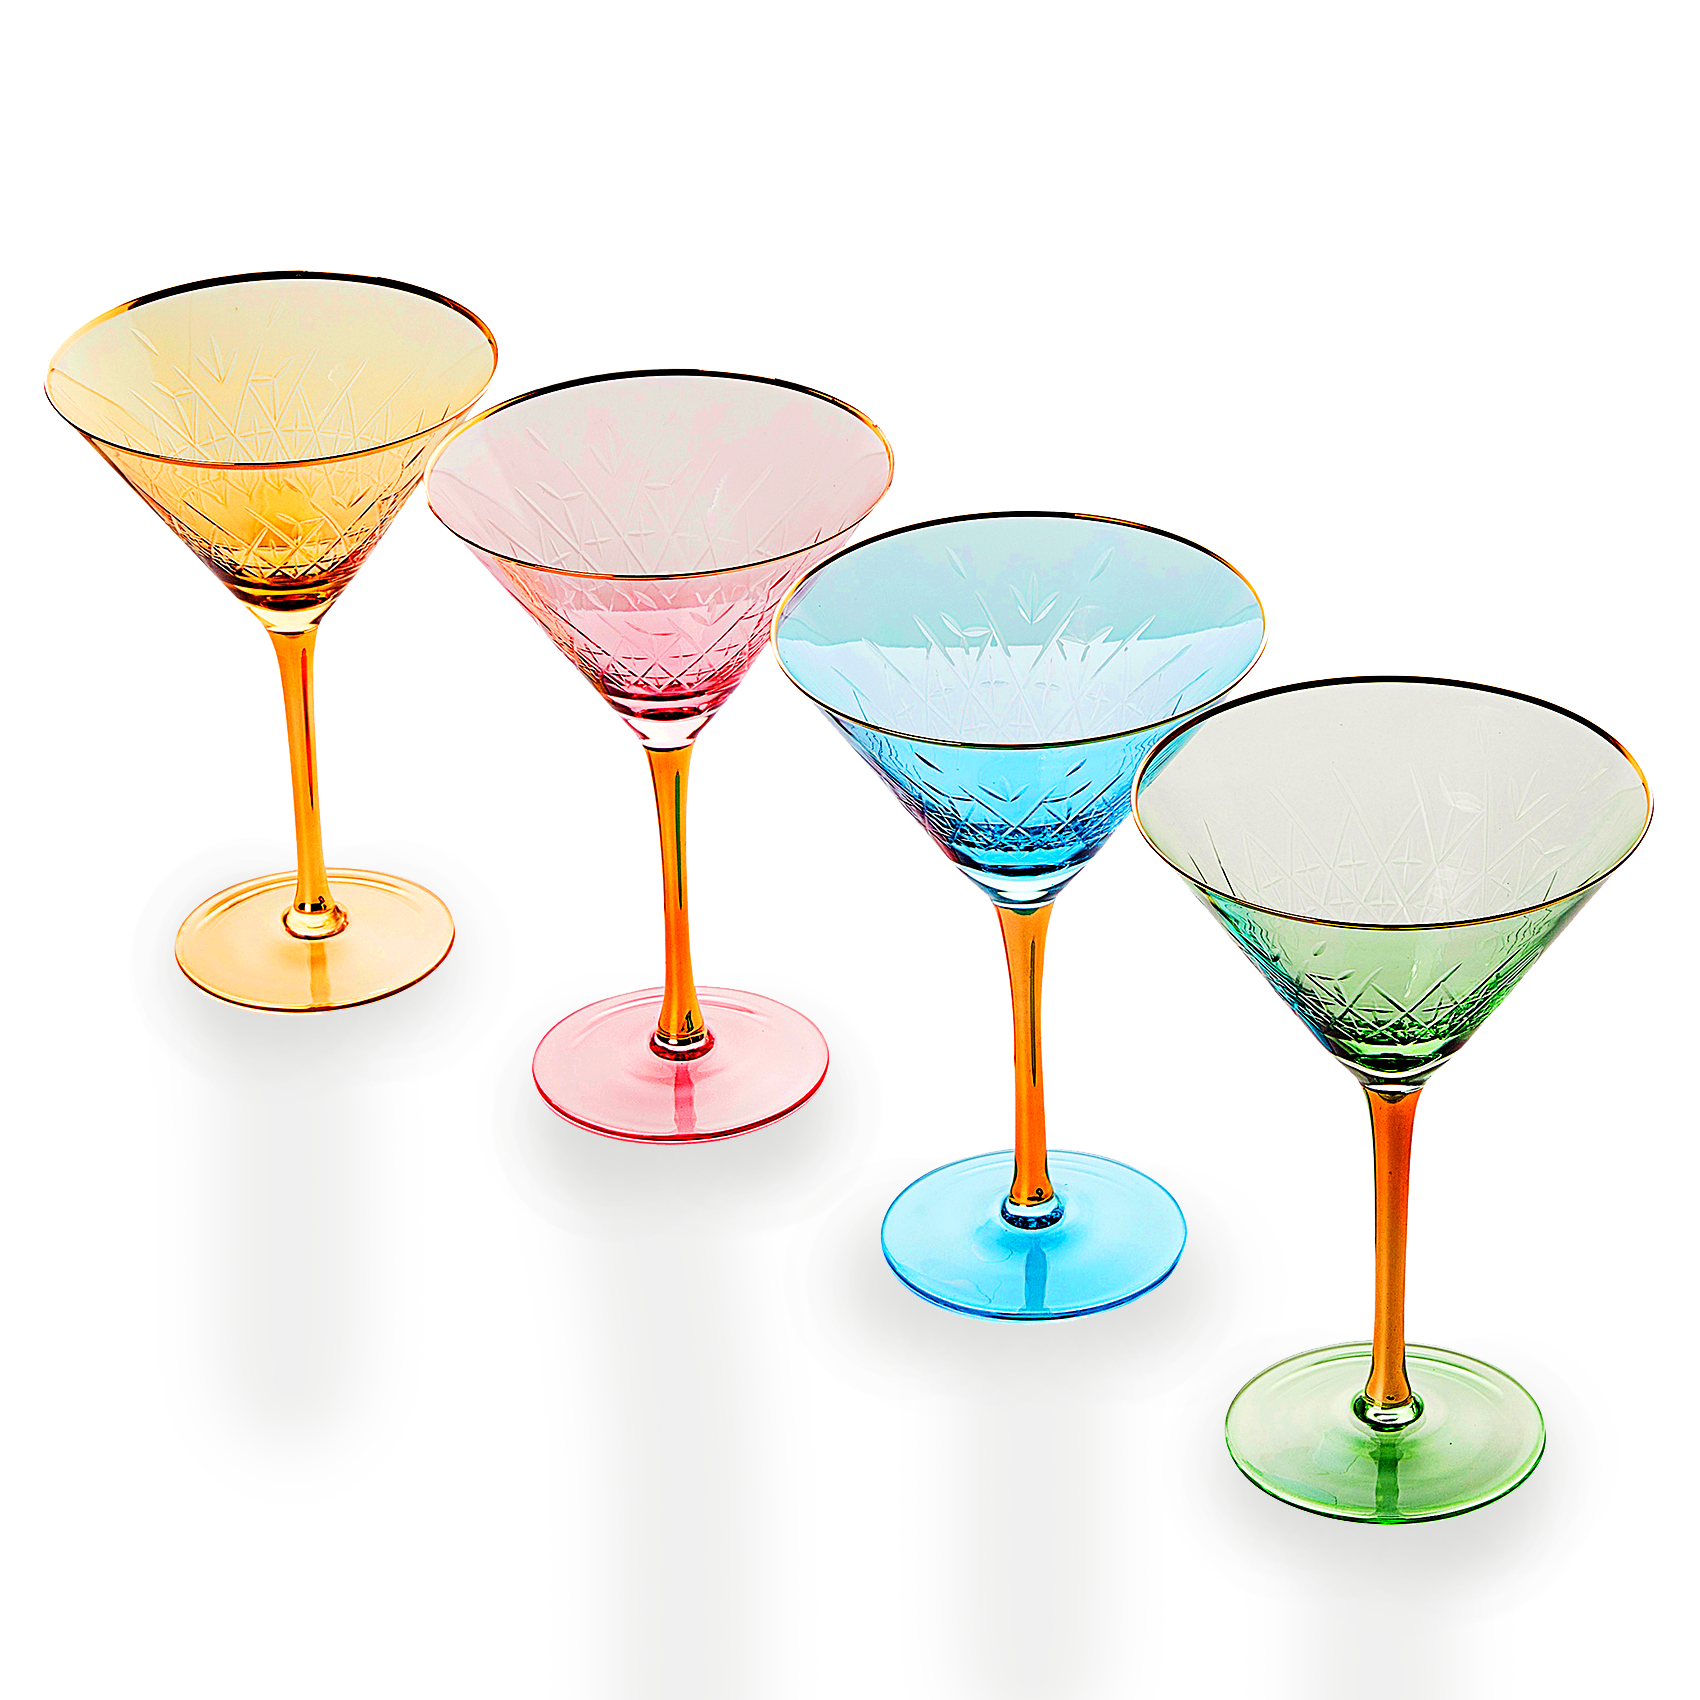 Etched Gold Rim Handcrafted Martini Glasses - Set of 4